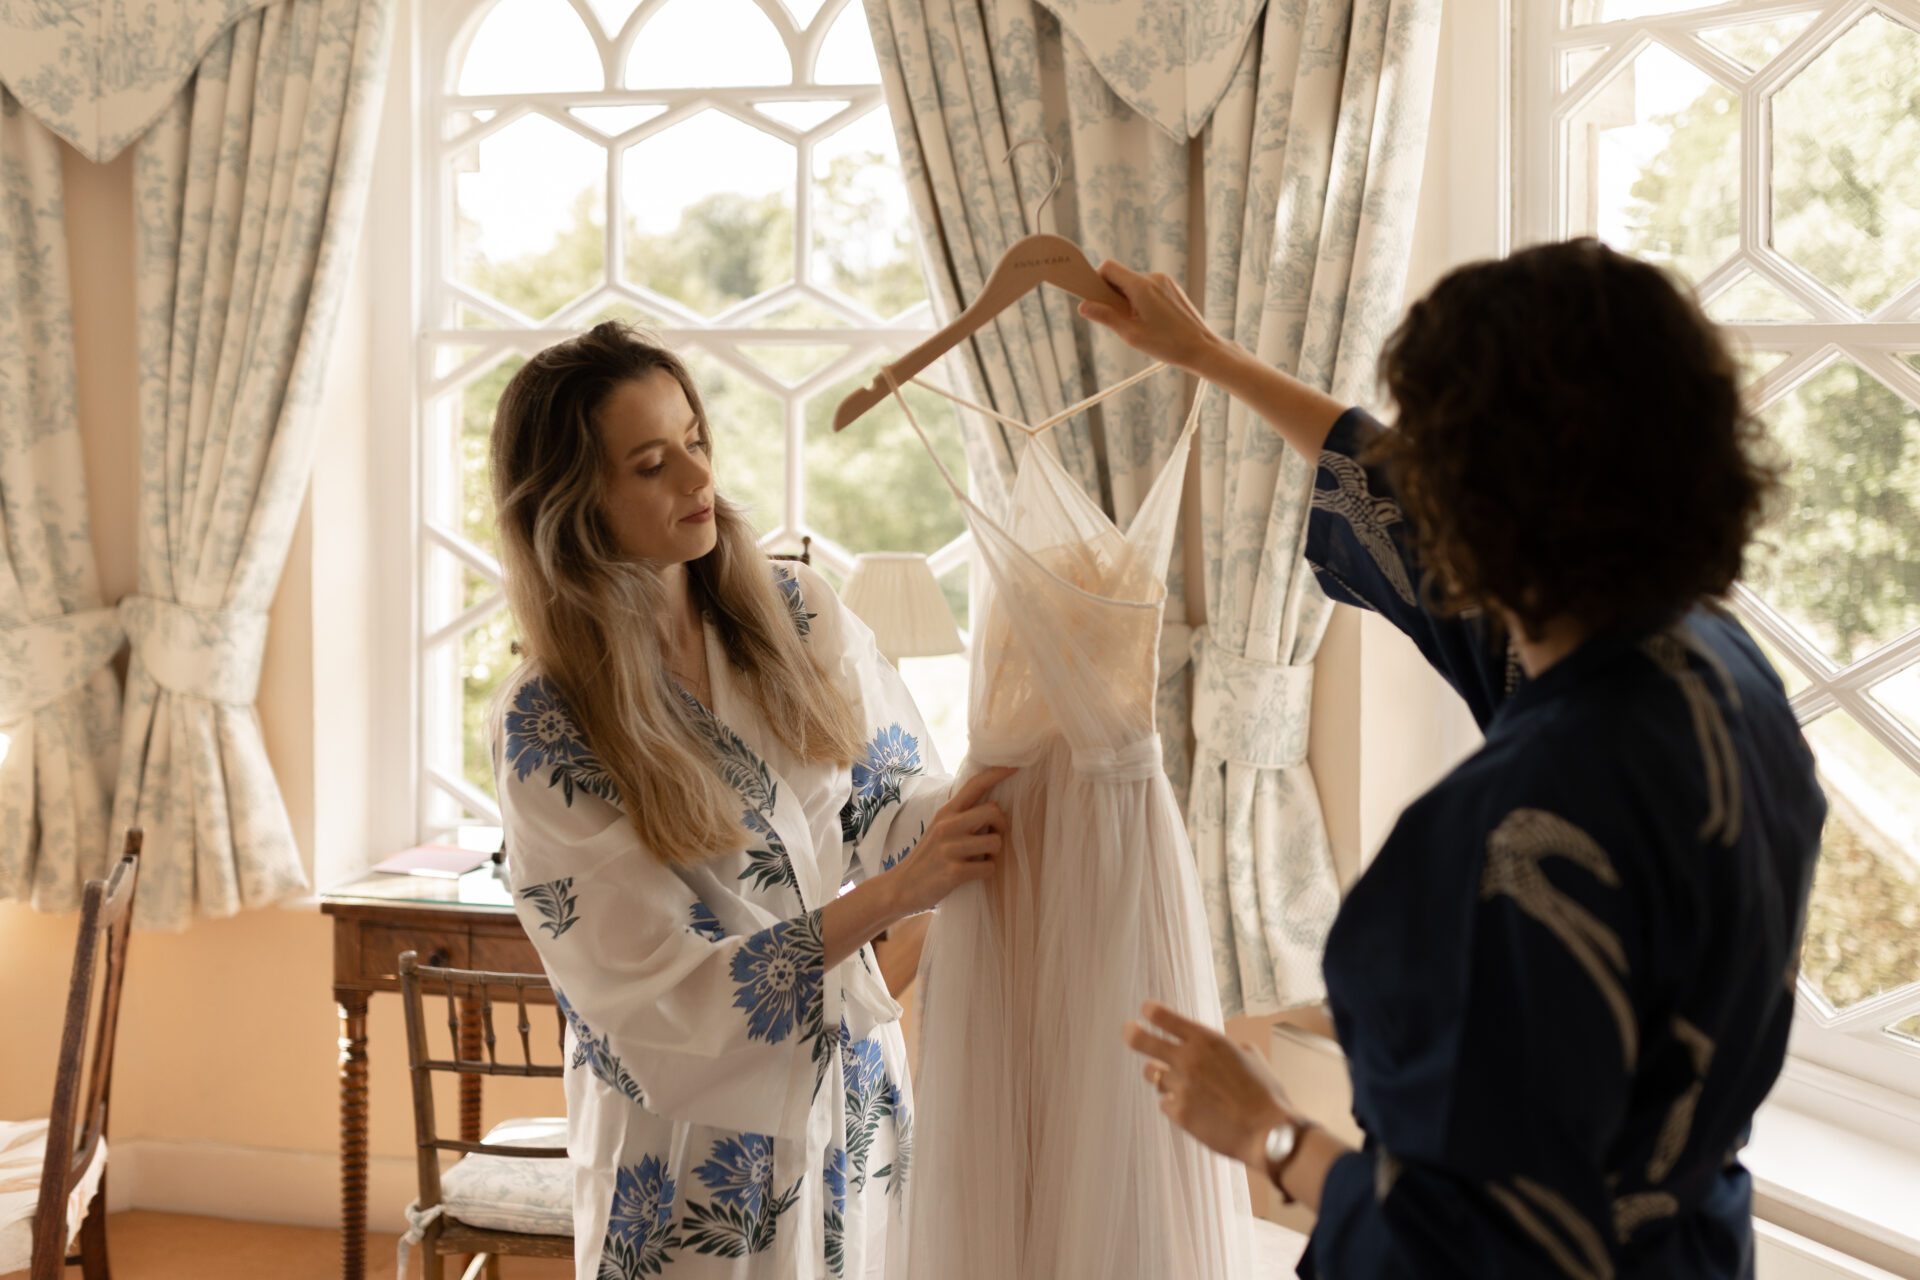 The bride gets ready to put on her wedding dress for her Gloucestershire wedding